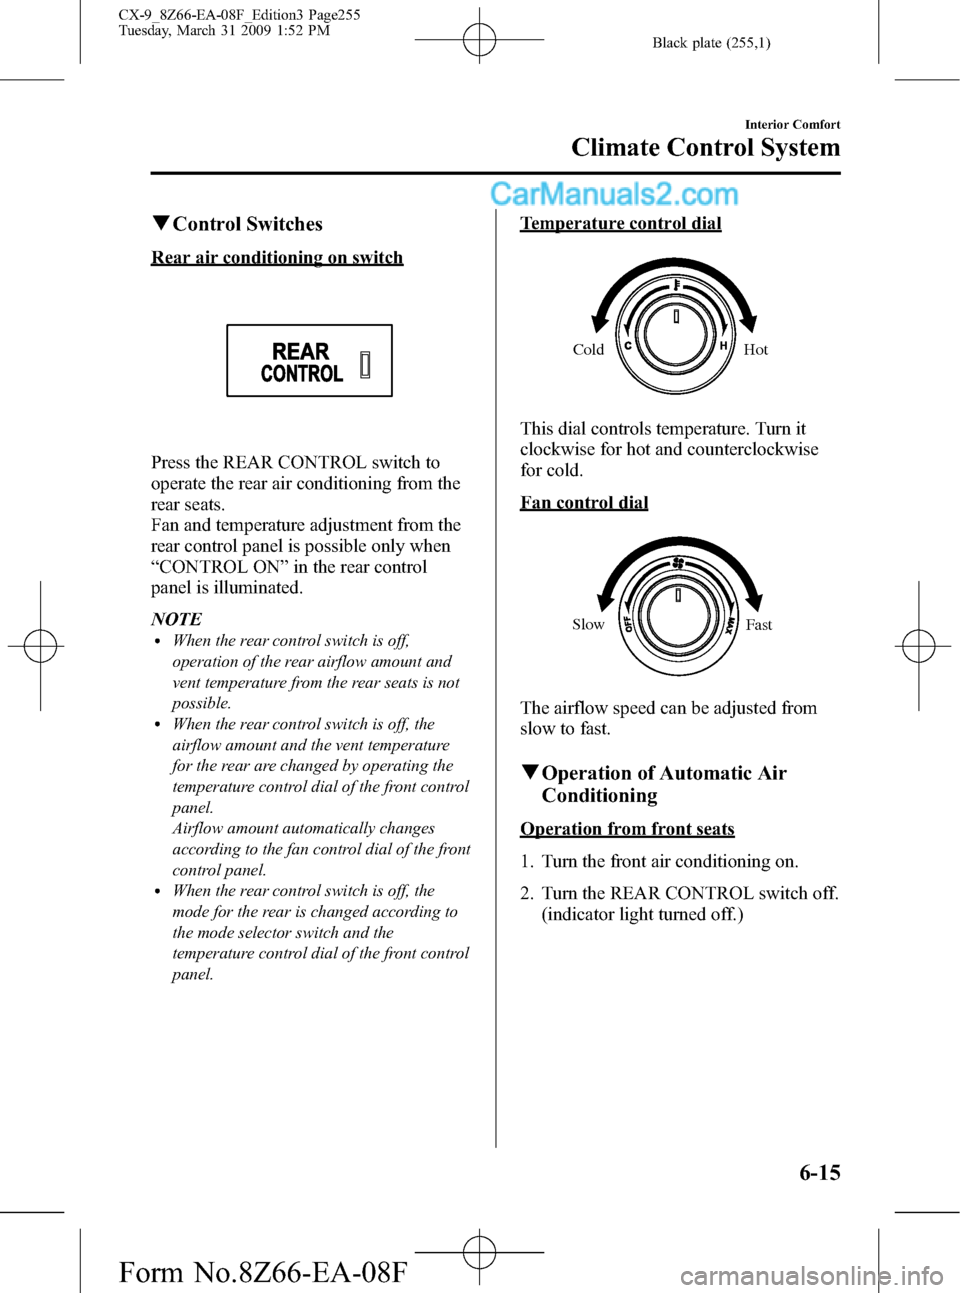 MAZDA MODEL CX-9 2009  Owners Manual (in English) Black plate (255,1)
qControl Switches
Rear air conditioning on switch
Press the REAR CONTROL switch to
operate the rear air conditioning from the
rear seats.
Fan and temperature adjustment from the
re